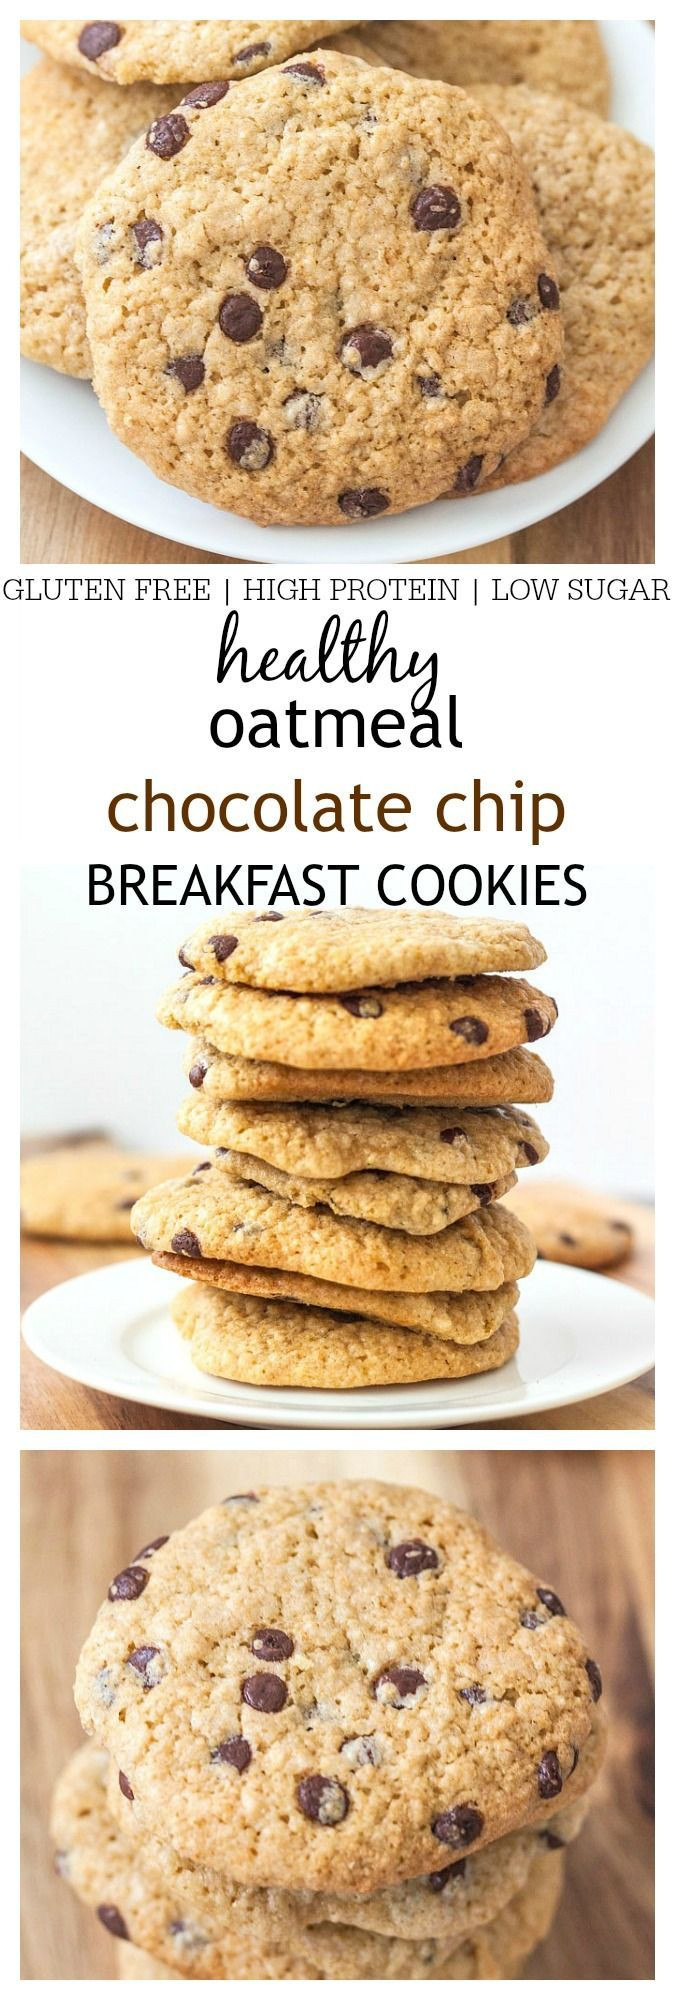 Healthy Gluten Free Chocolate Chip Cookies
 17 Best images about Breakfast that Rachie might eat